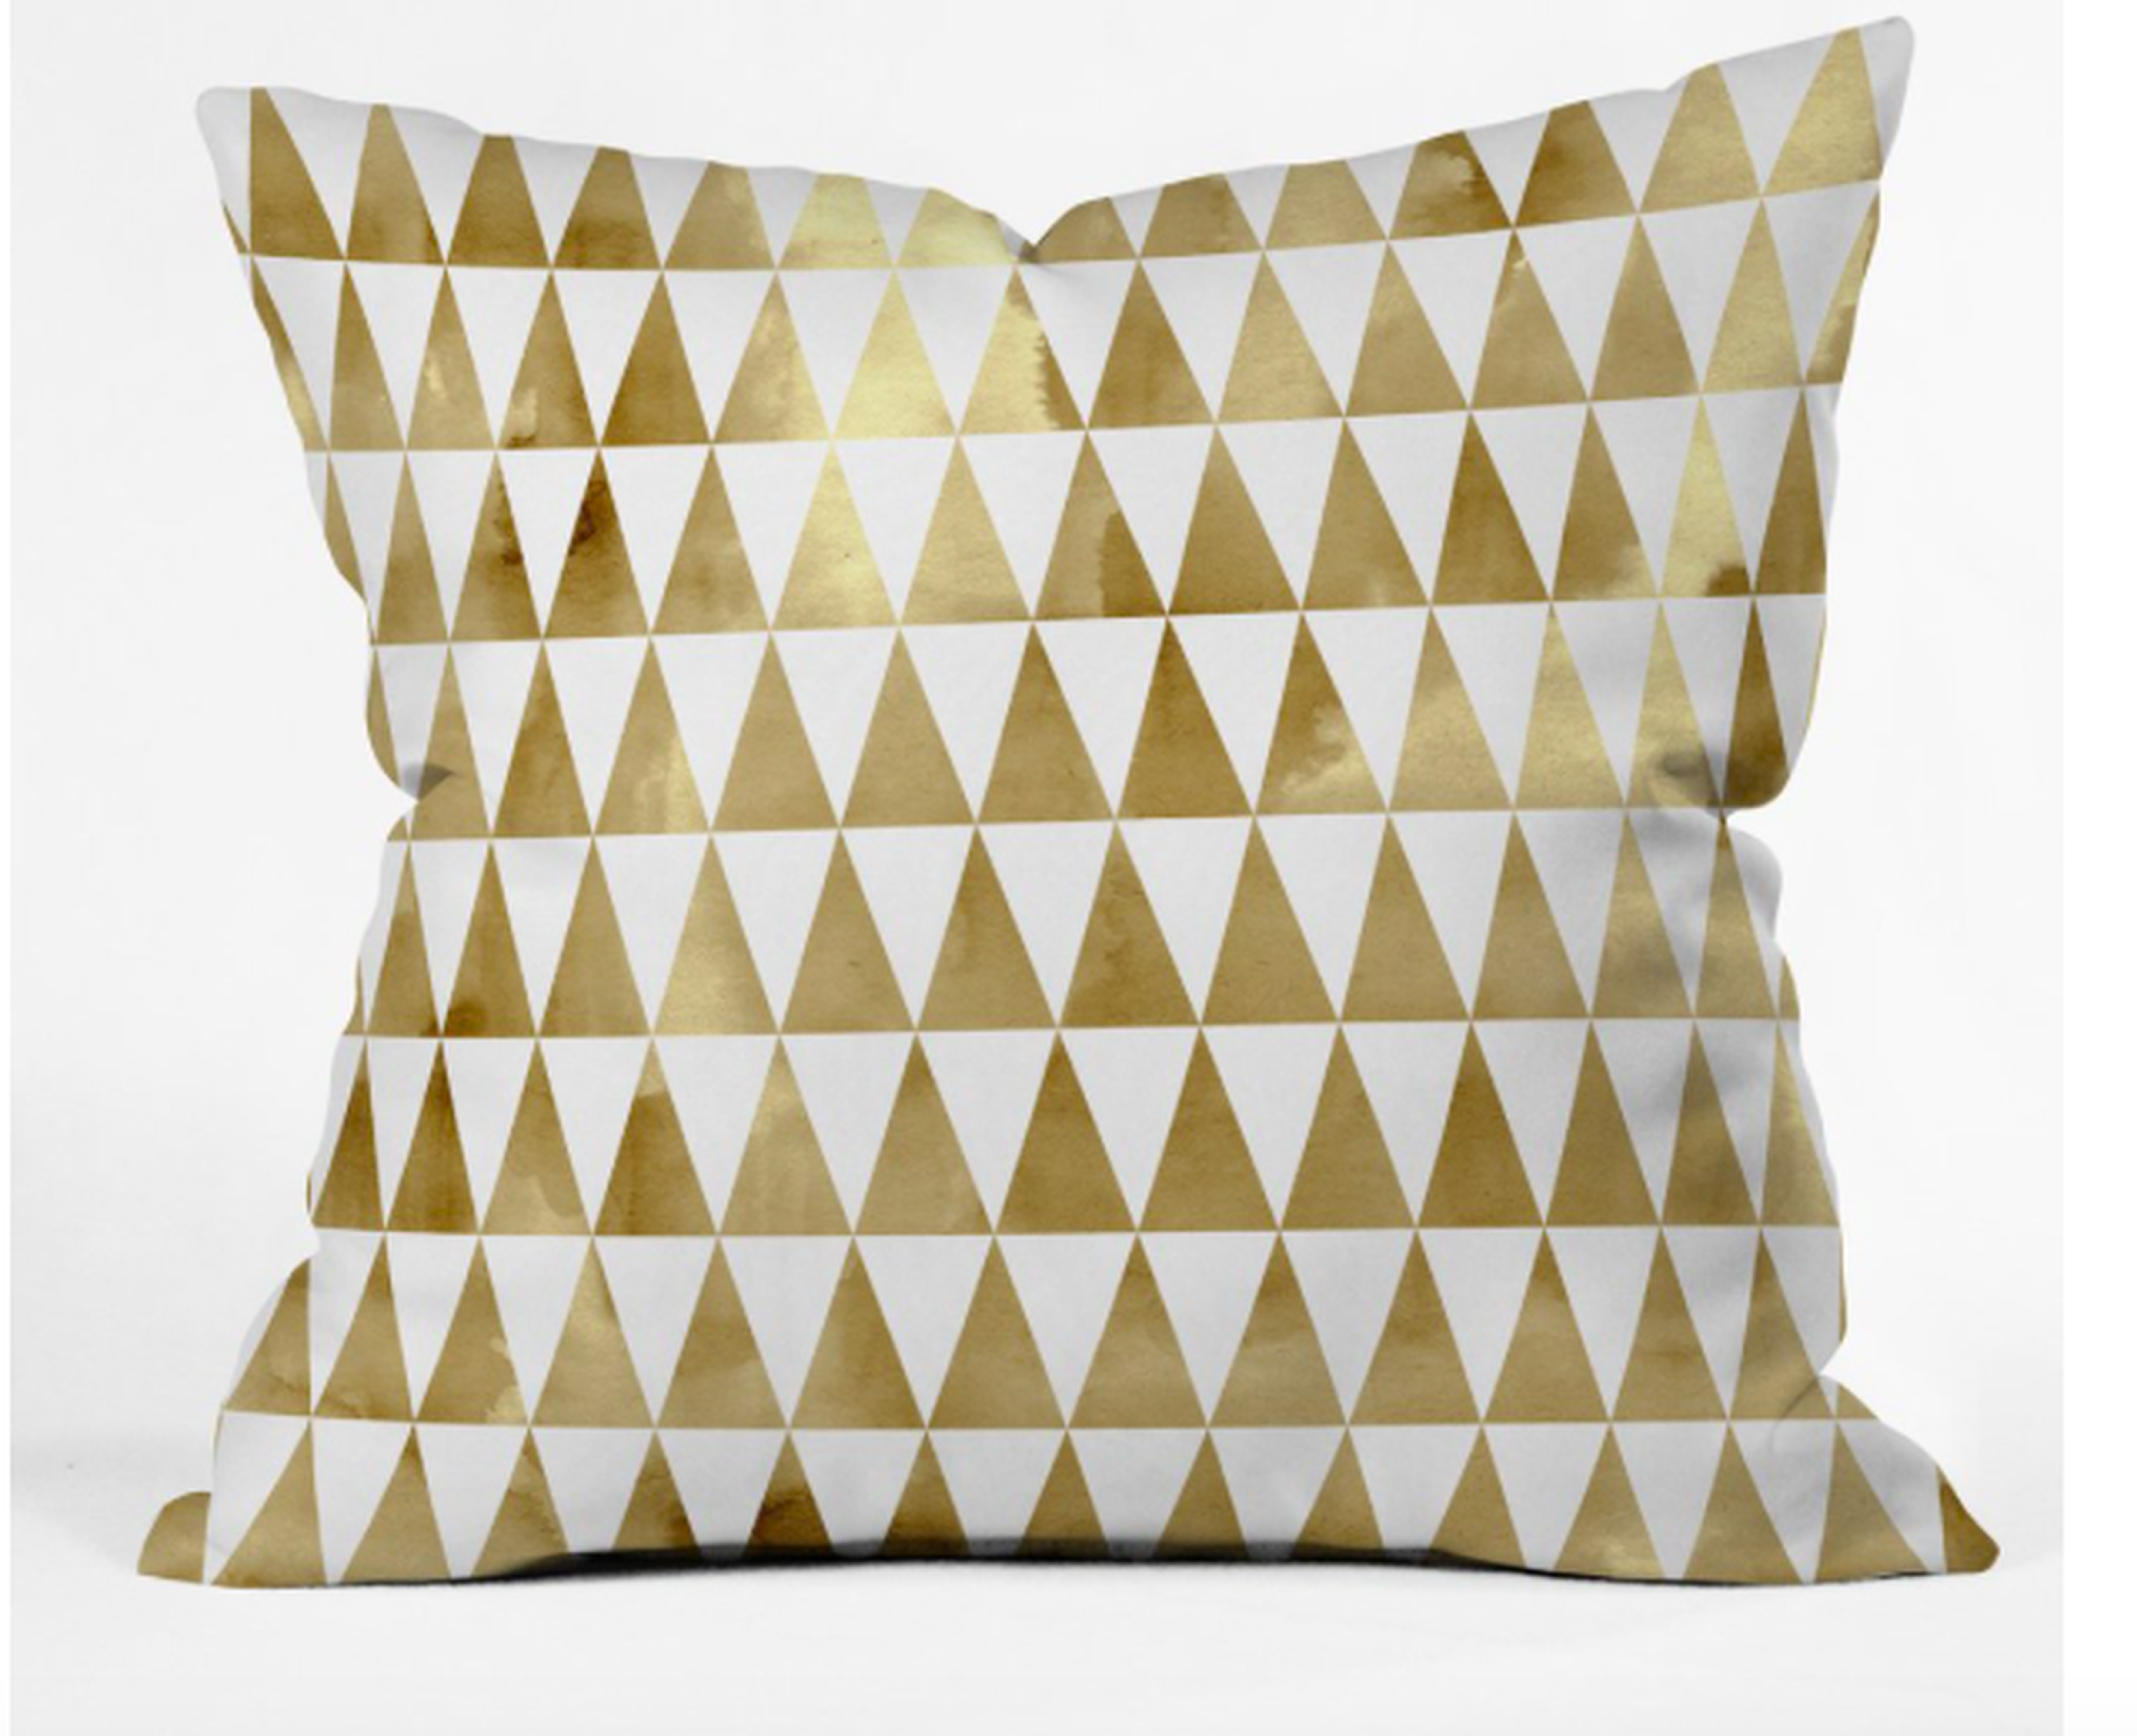 TRIANGLE PATTERN GOLD 20 x 20 with Insert - Wander Print Co.